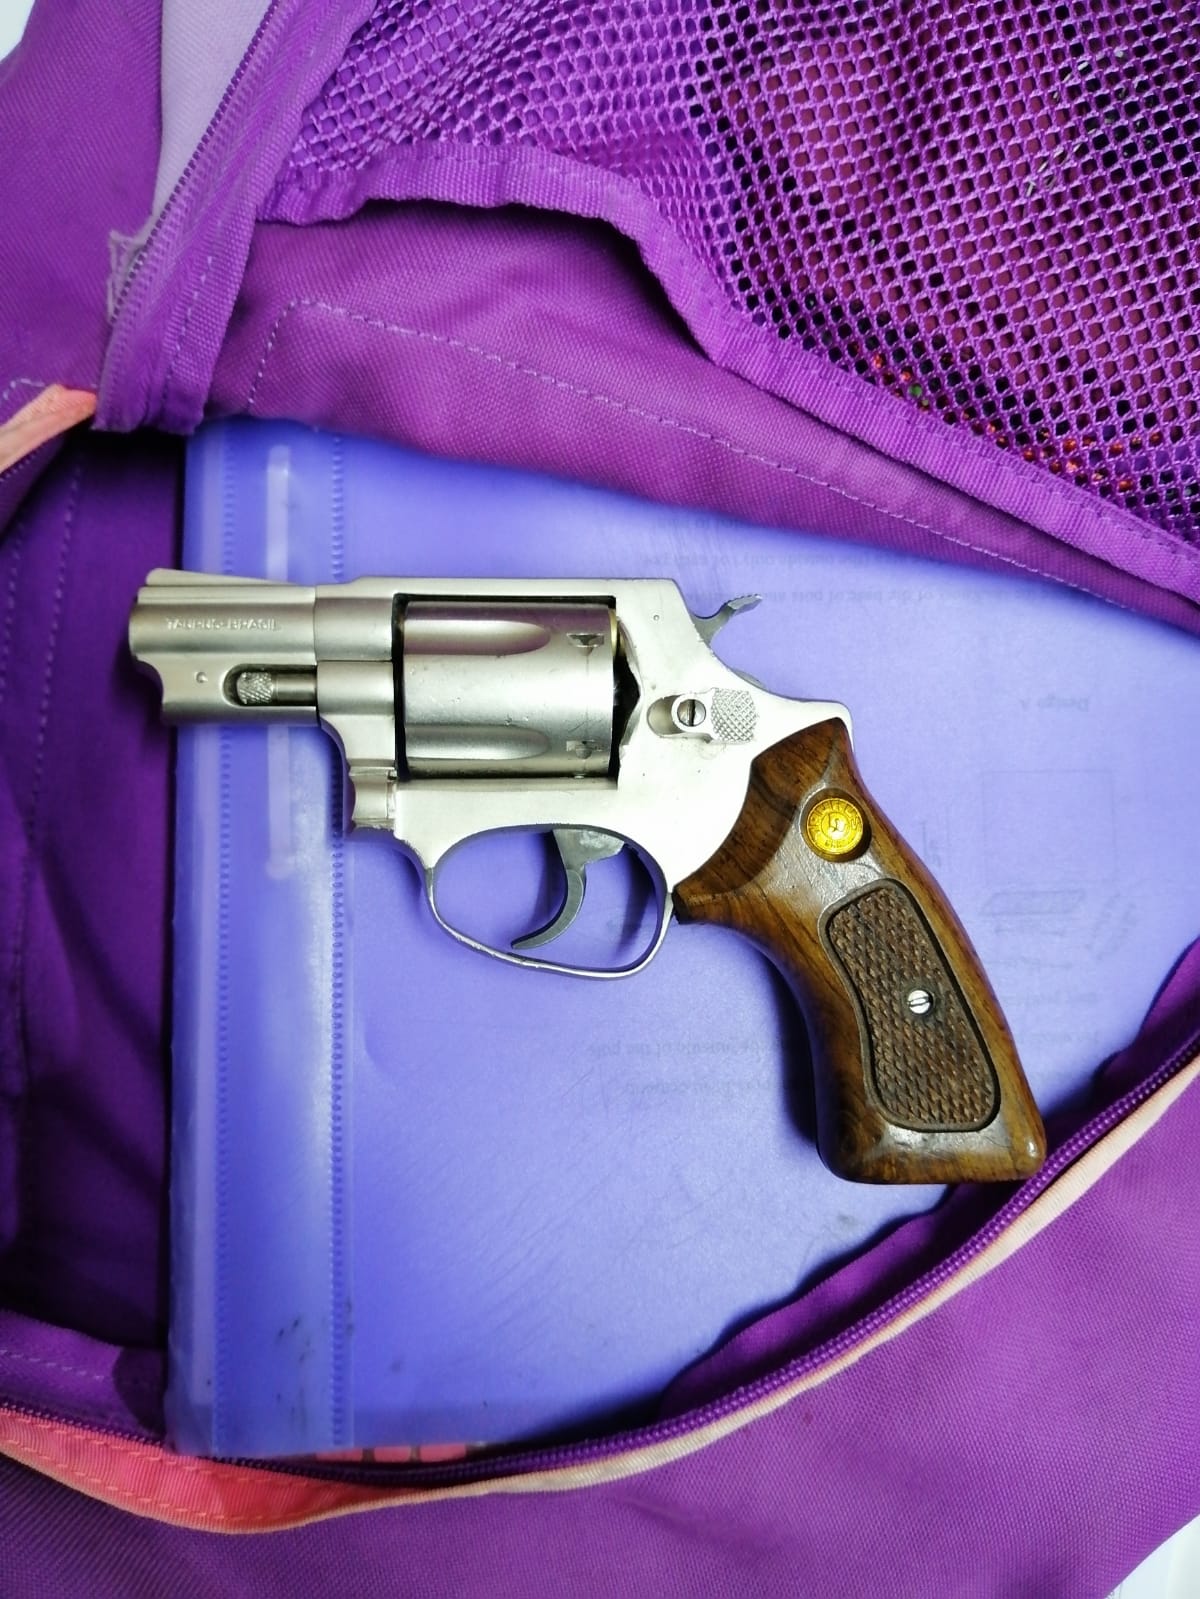 Scholar arrested with firearm at school